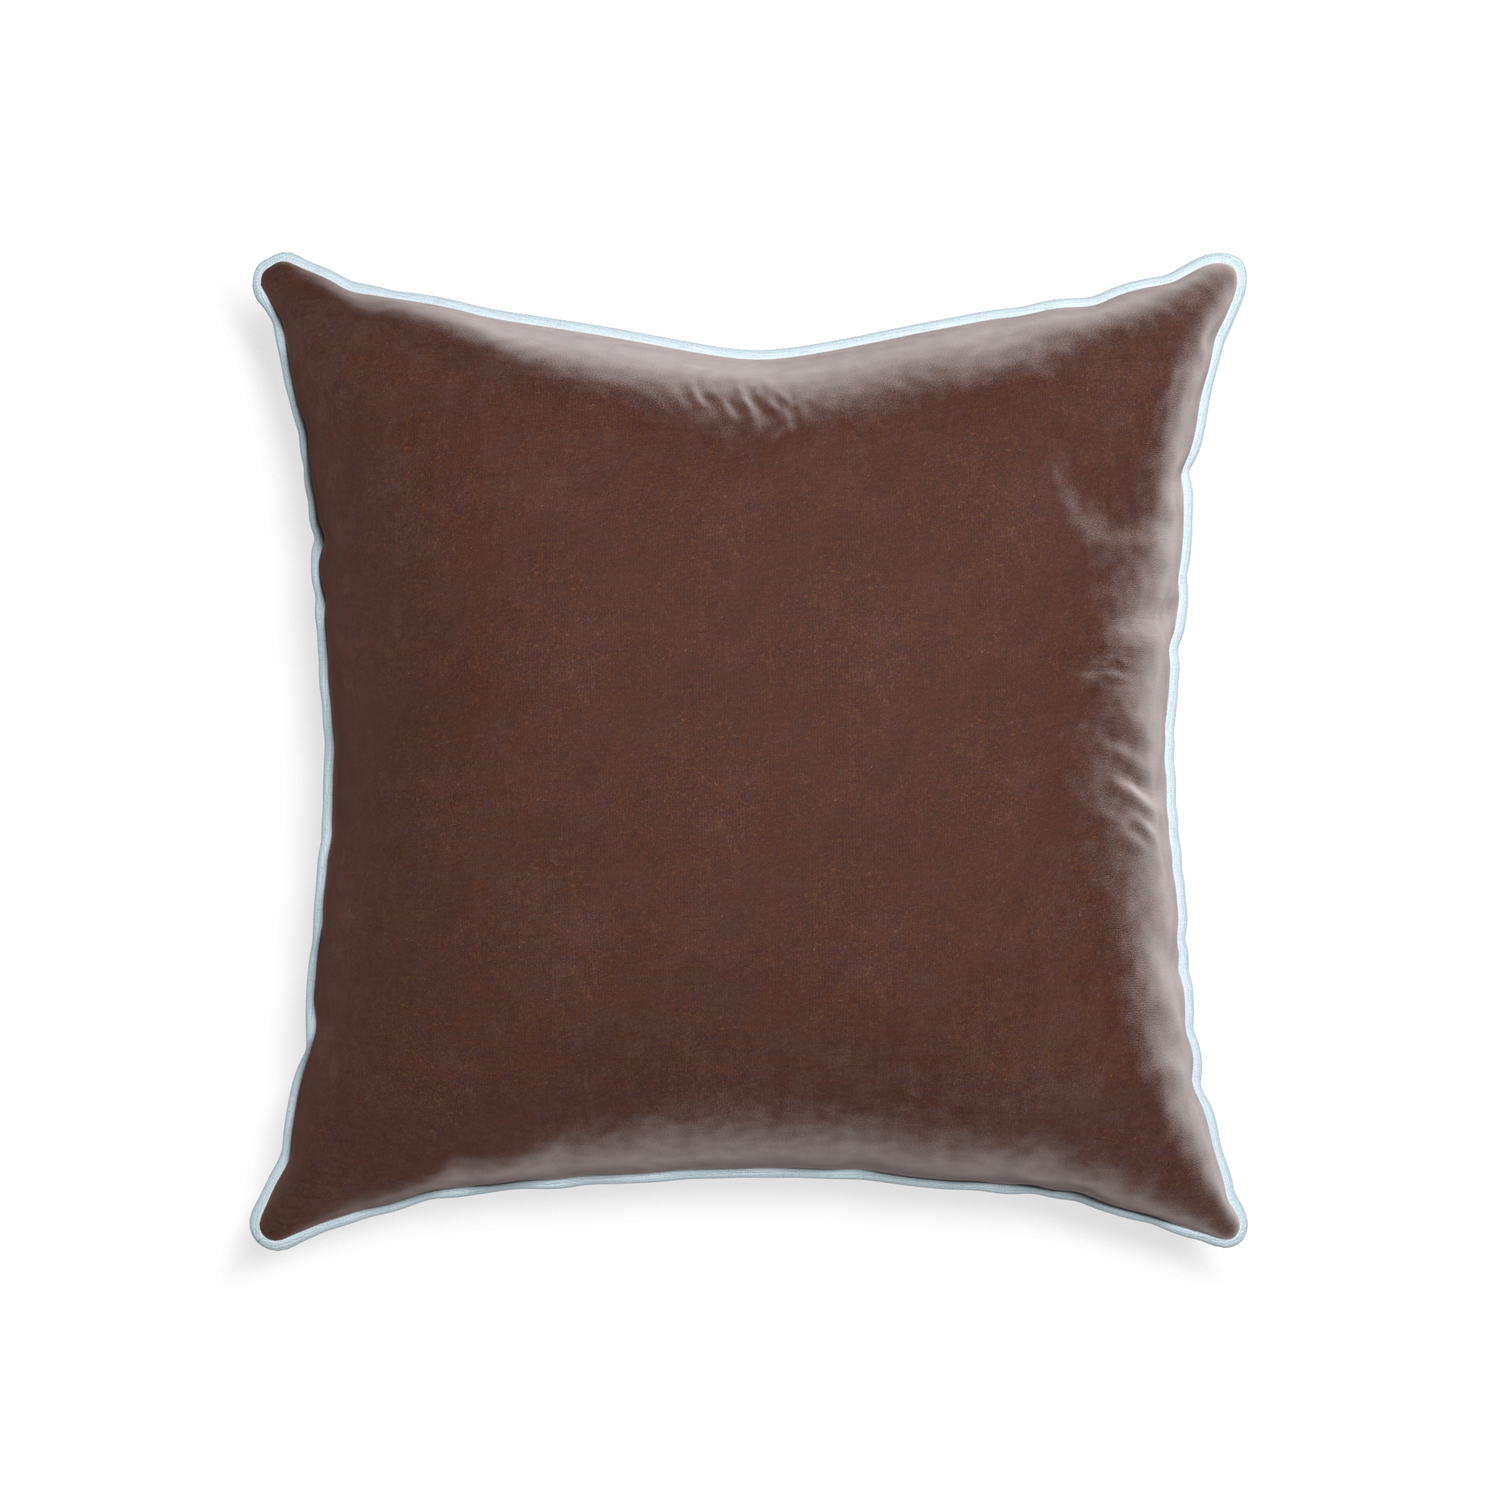 22-square walnut velvet custom pillow with powder piping on white background